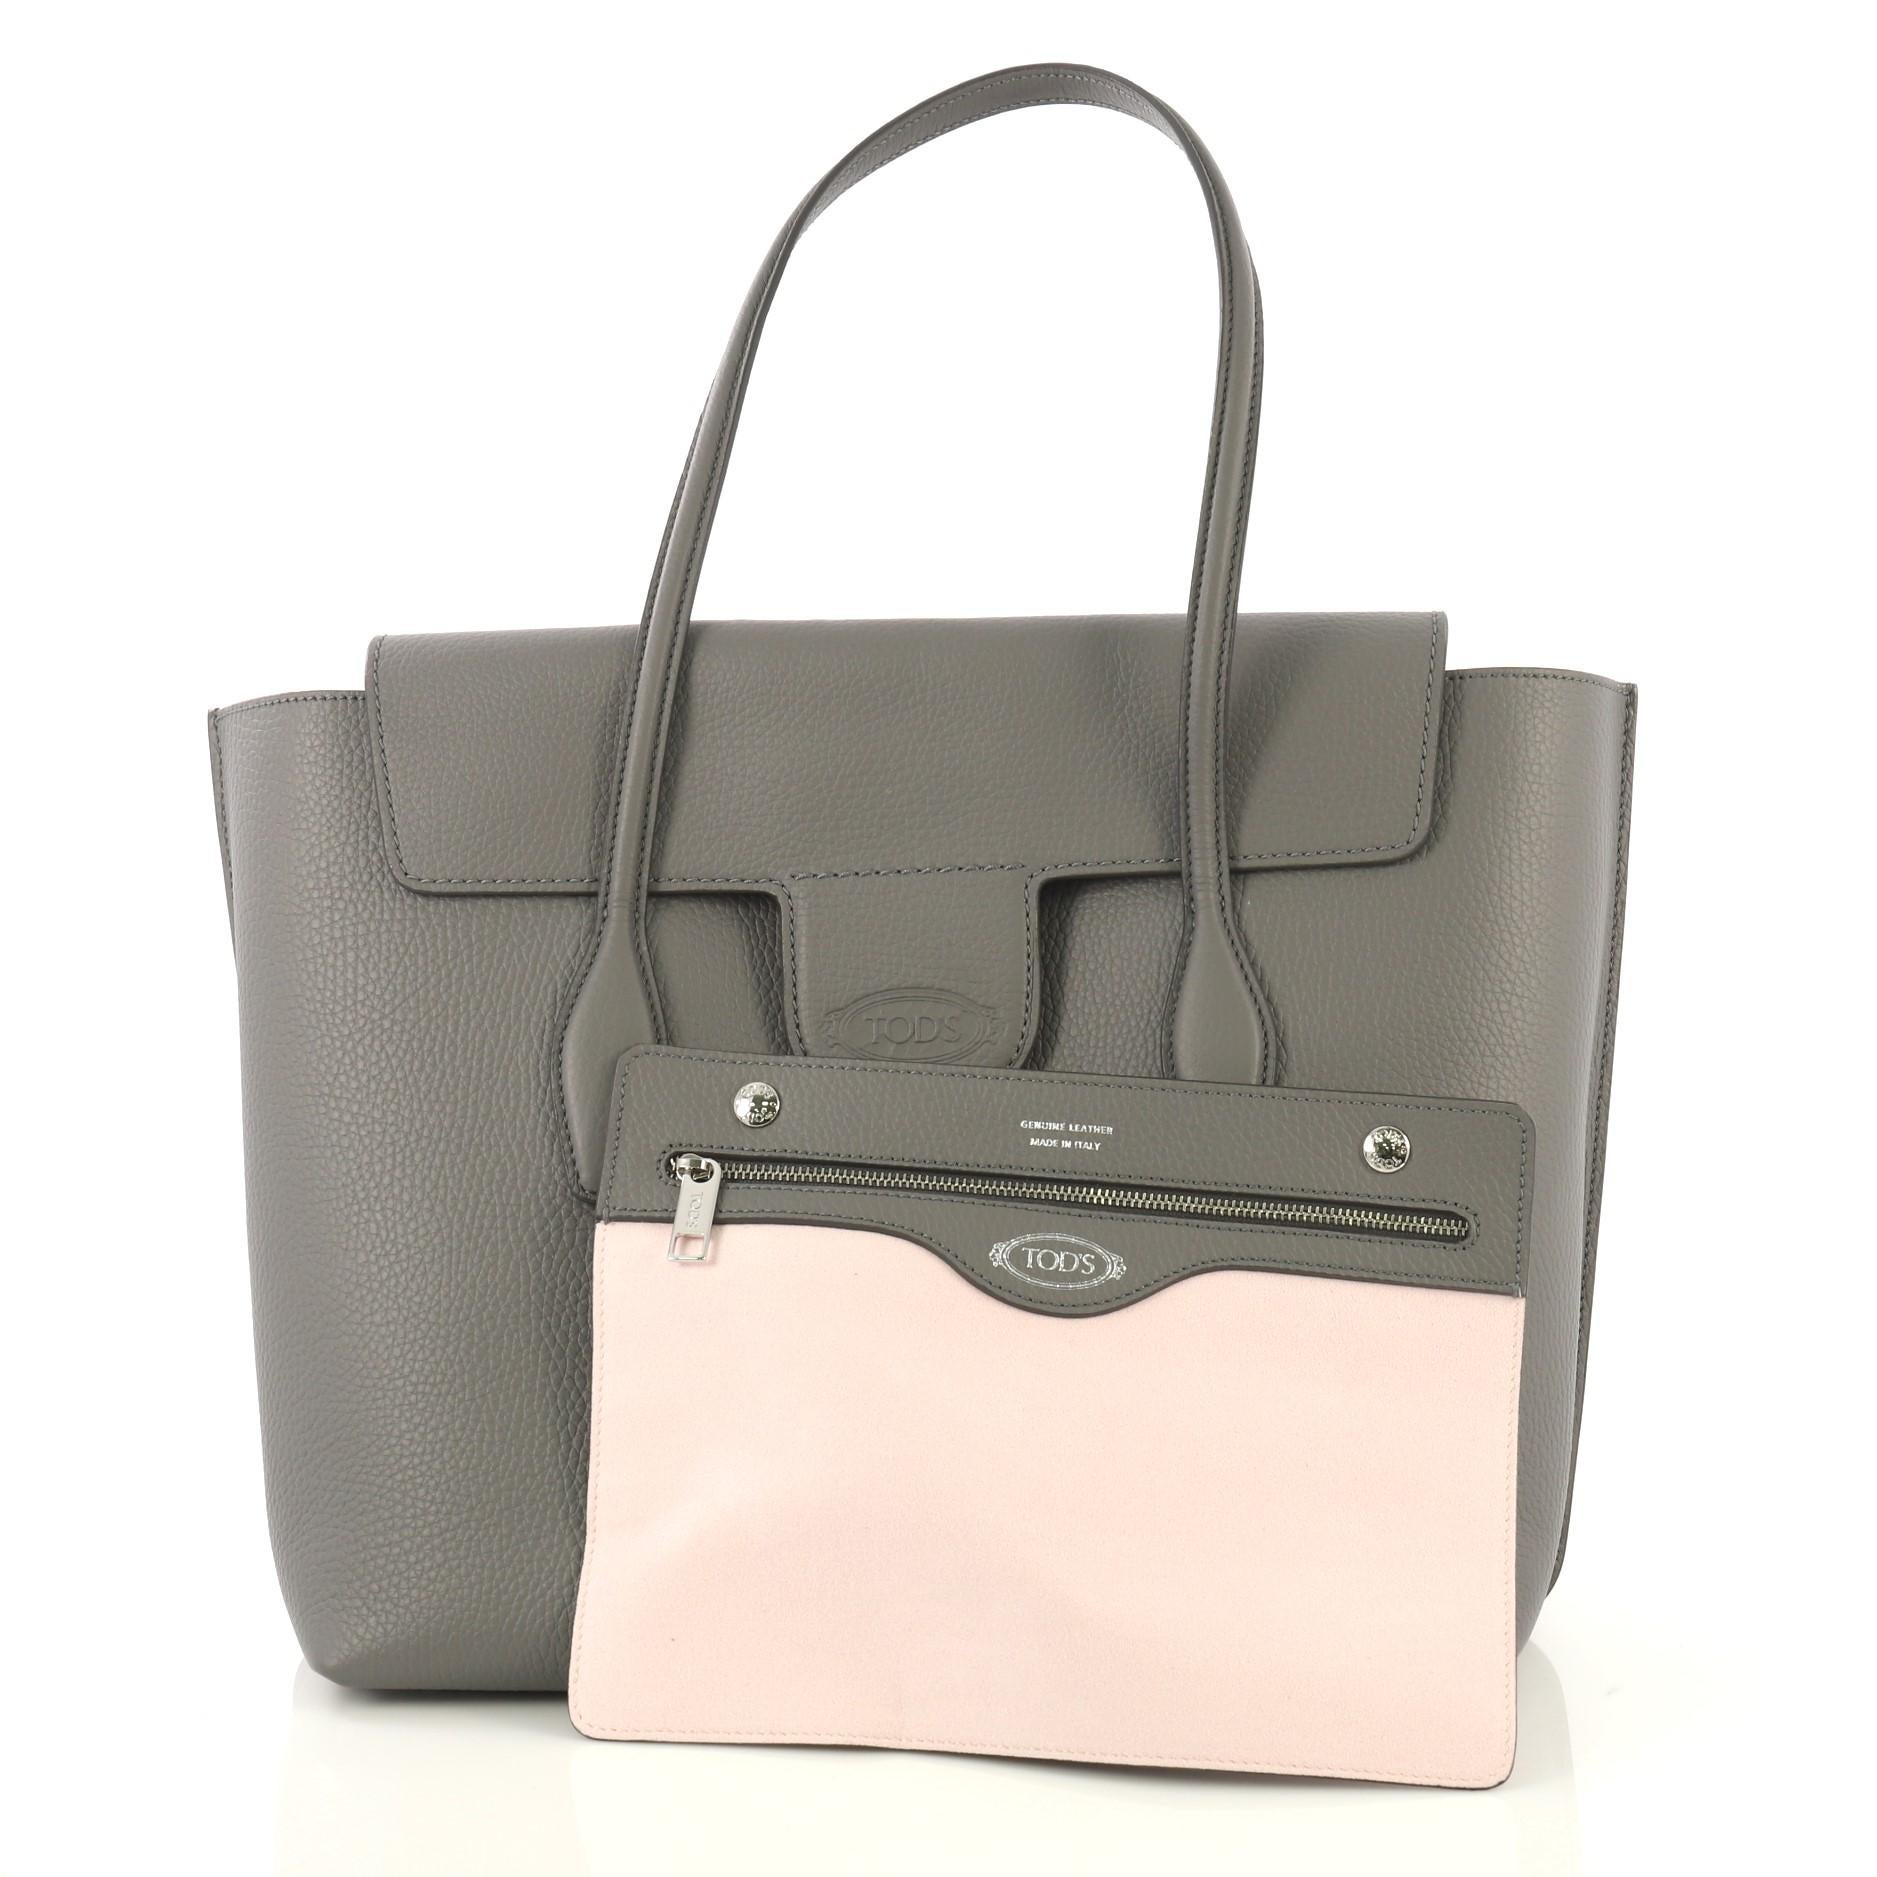 This Tod's Joy Flap Satchel Leather Medium, crafted from gray leather, features dual slim leather handles, front flap compartment, and silver-tone hardware. It opens to a light pink microfiber interior with zip pocket. 

Estimated Retail Price: